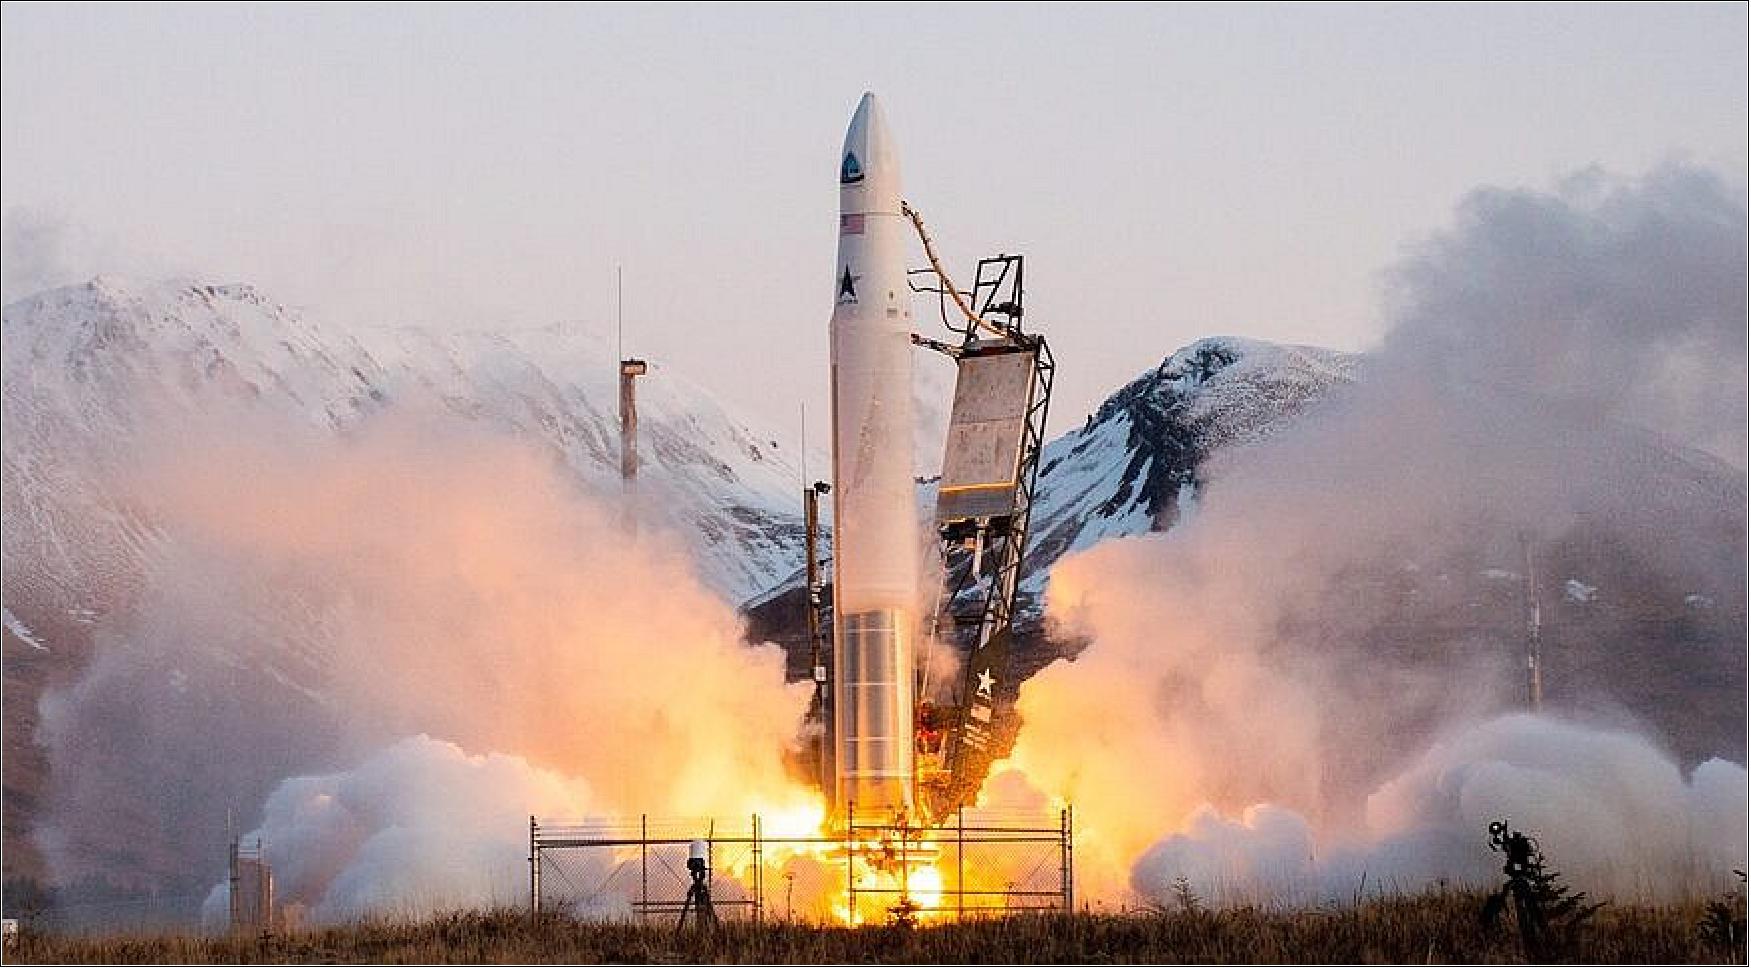 Figure 11: Astra, a small satellite launch services provider, is one of several vendors eligible to compete for Space Force contracts for responsive space missions (image credit: Brady Kenniston/Astra)